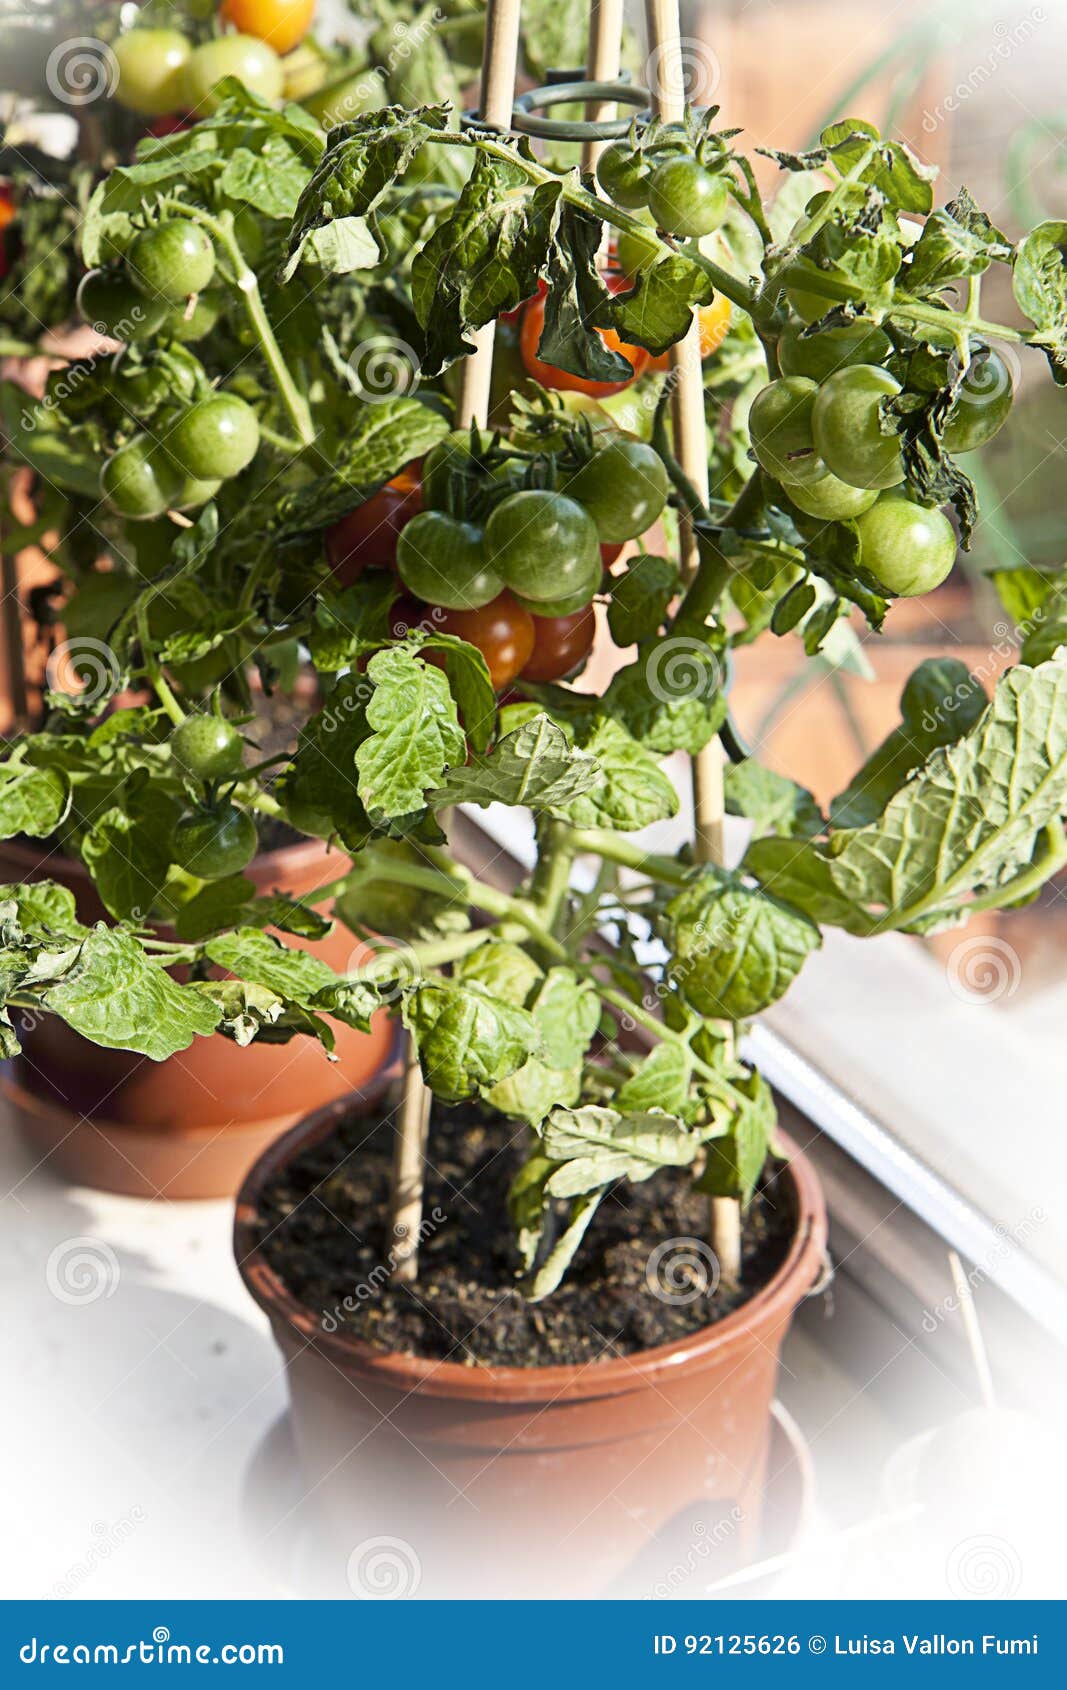 Gardening Cherry Tomatoes On Plant Ready To Harvest Stock Photo